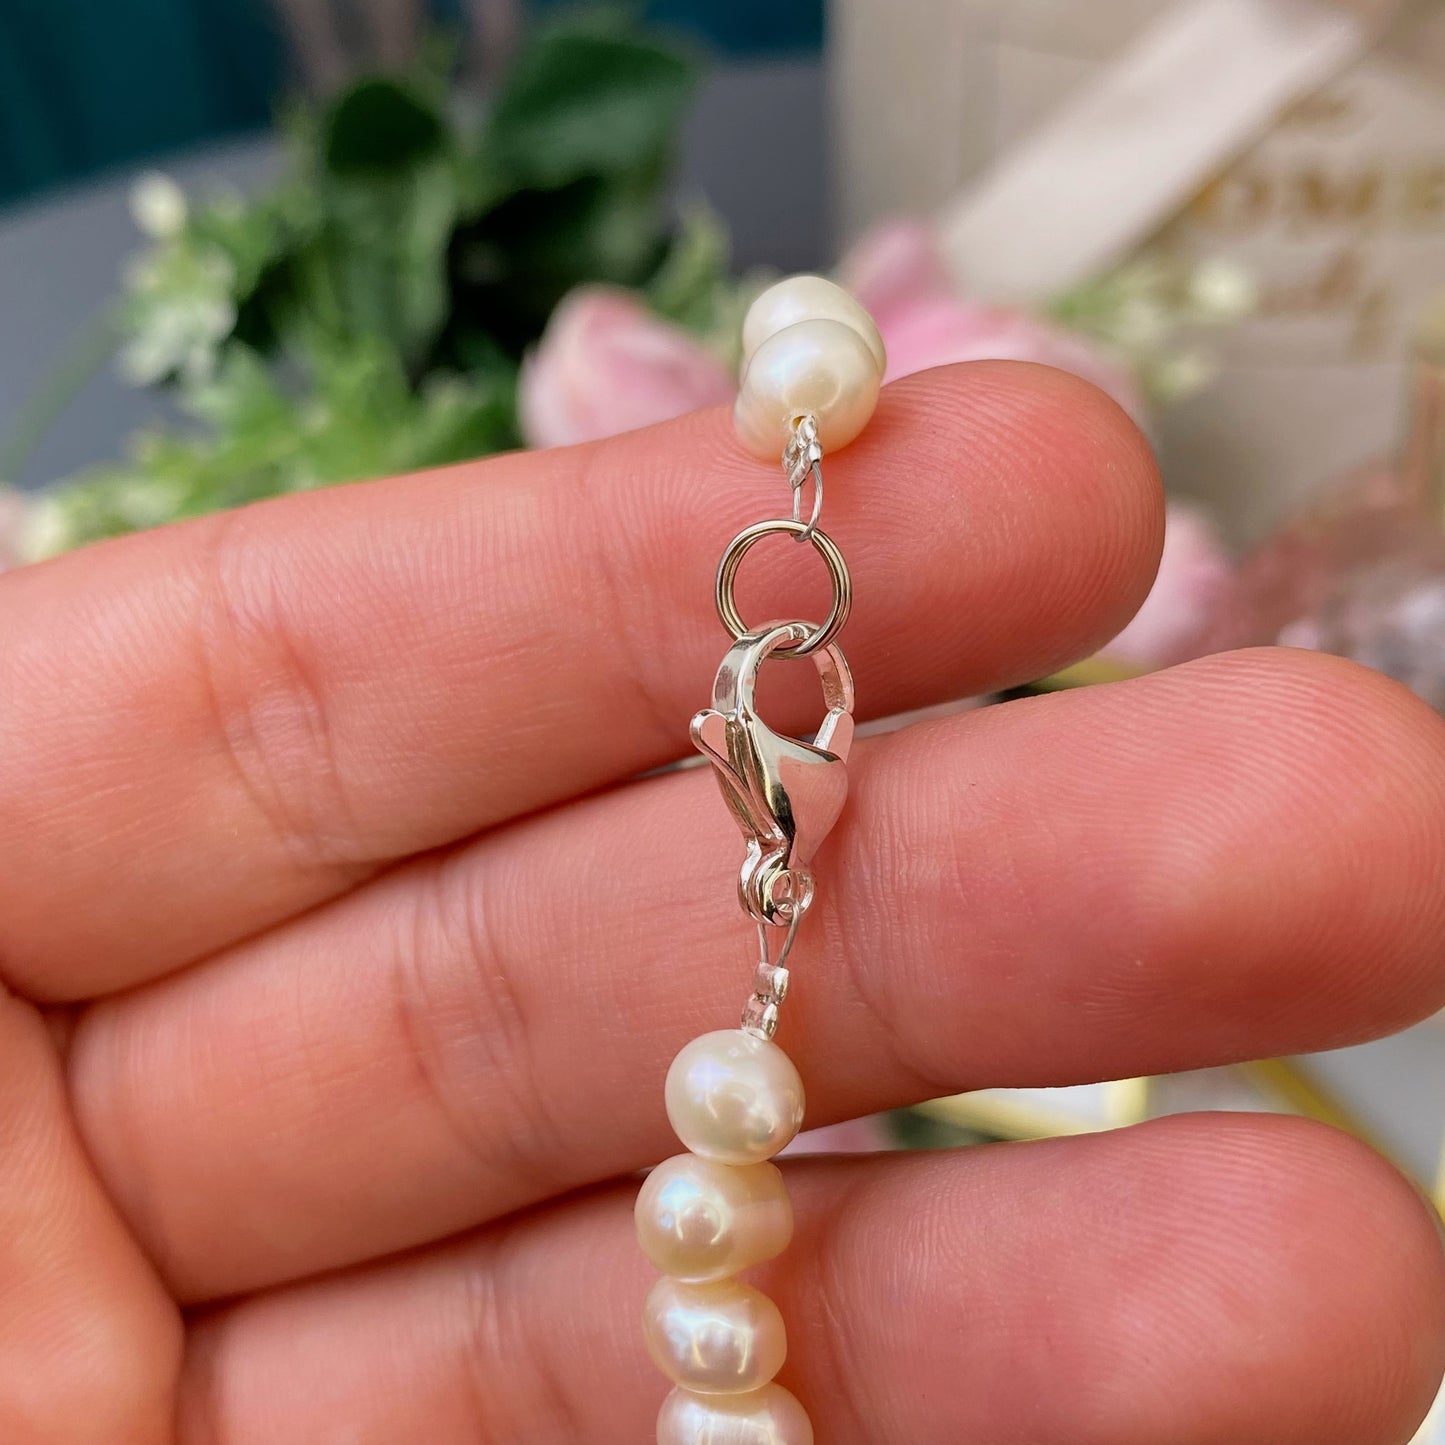 River Pearl necklace (River Pearls 5-6mm, 38cm)